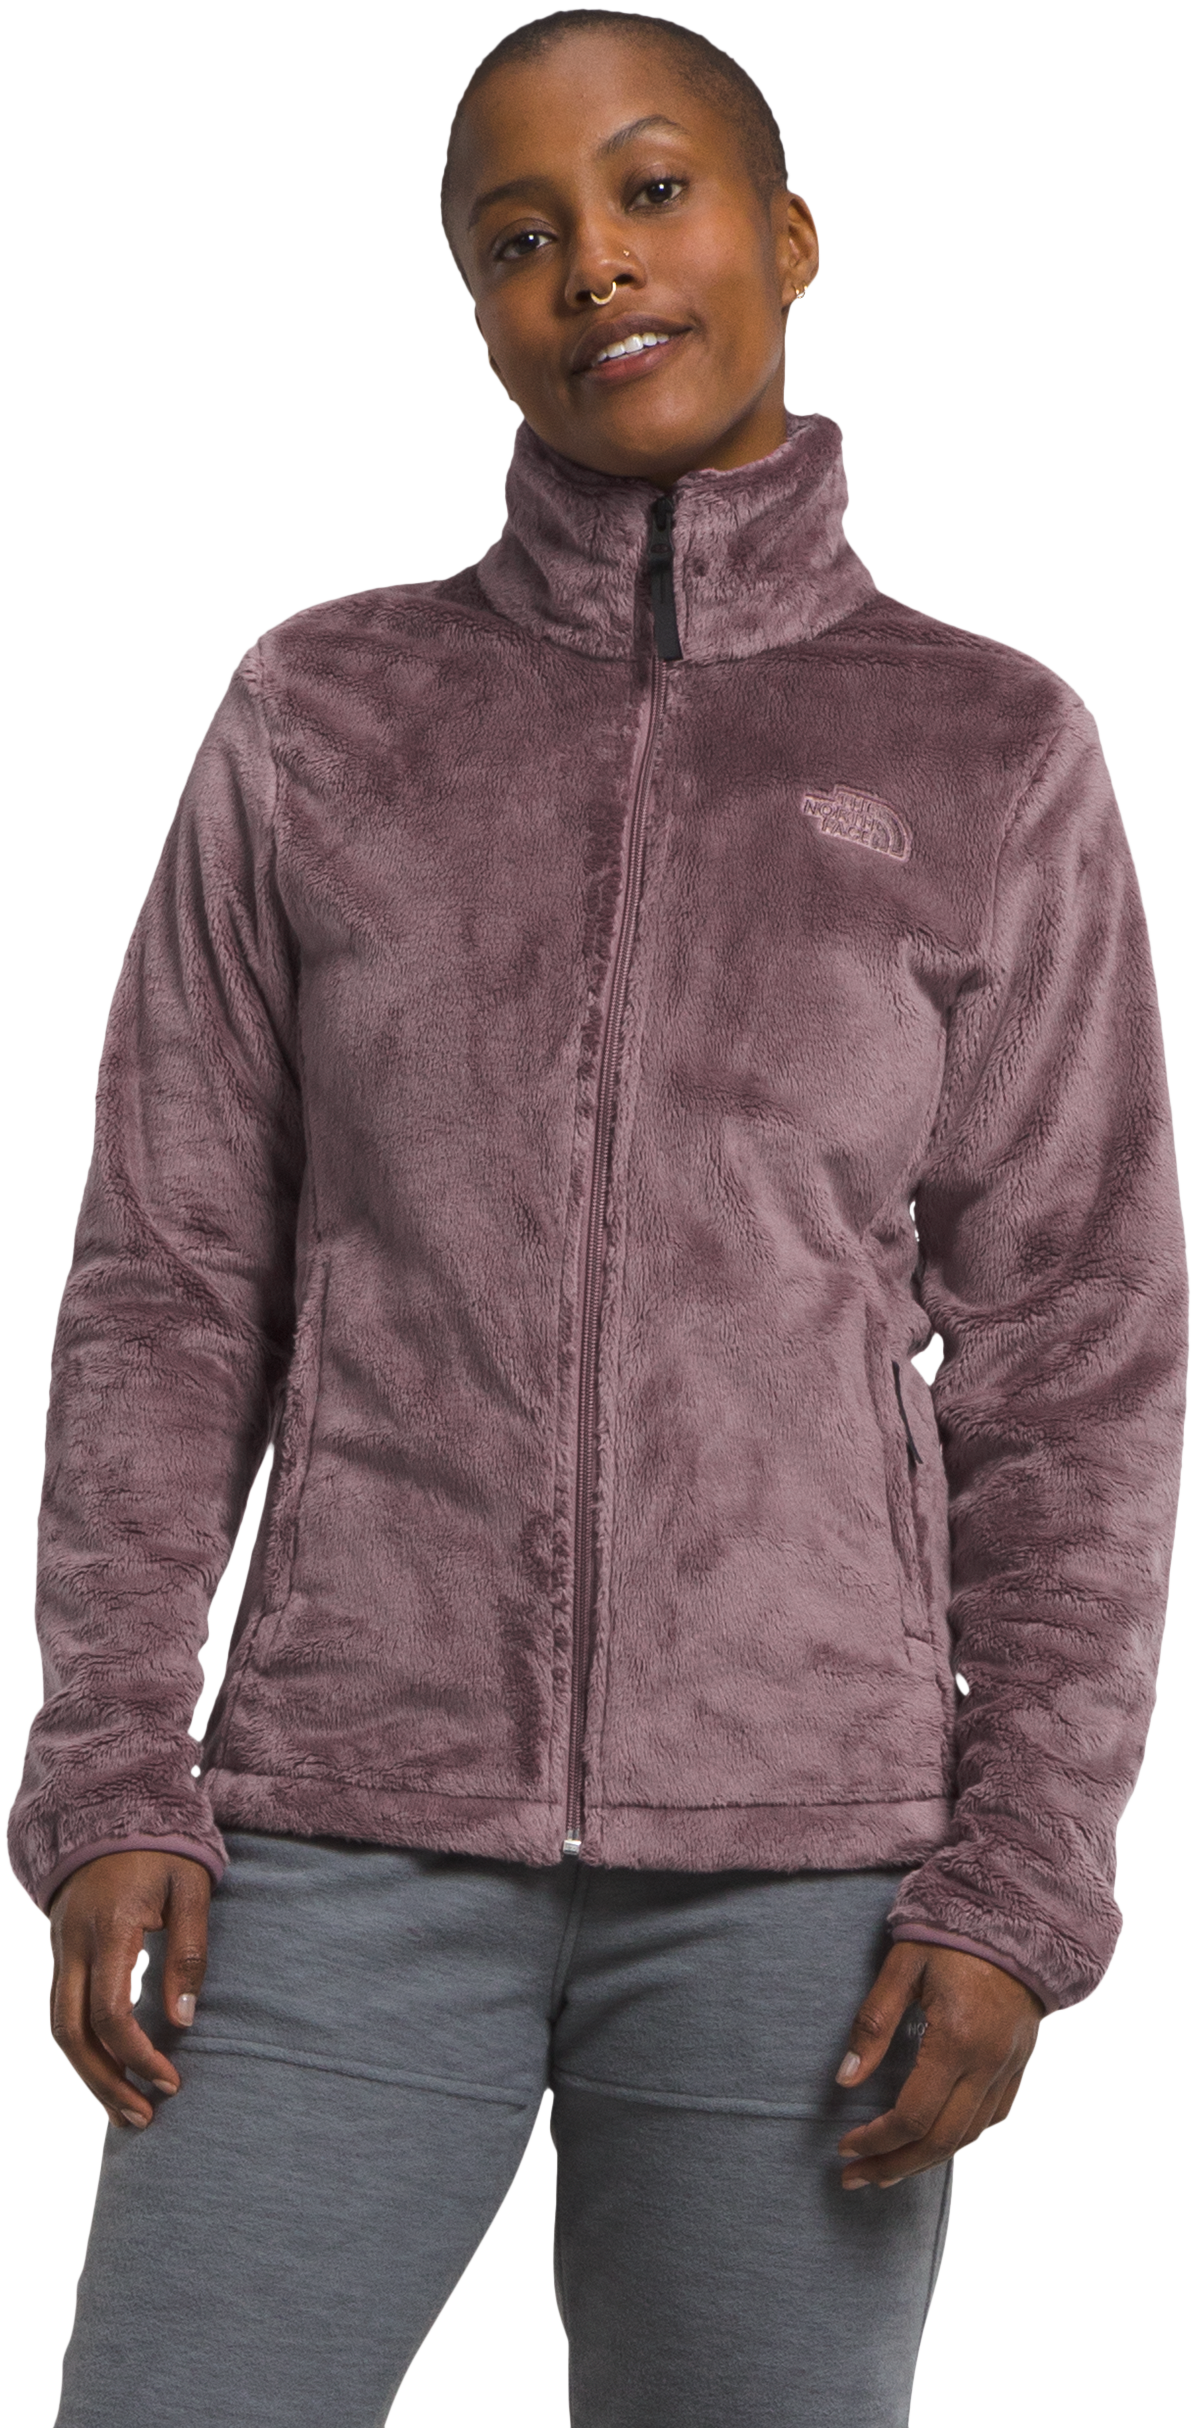 The North Face Osito Jacket for Ladies - Fawn Grey - M